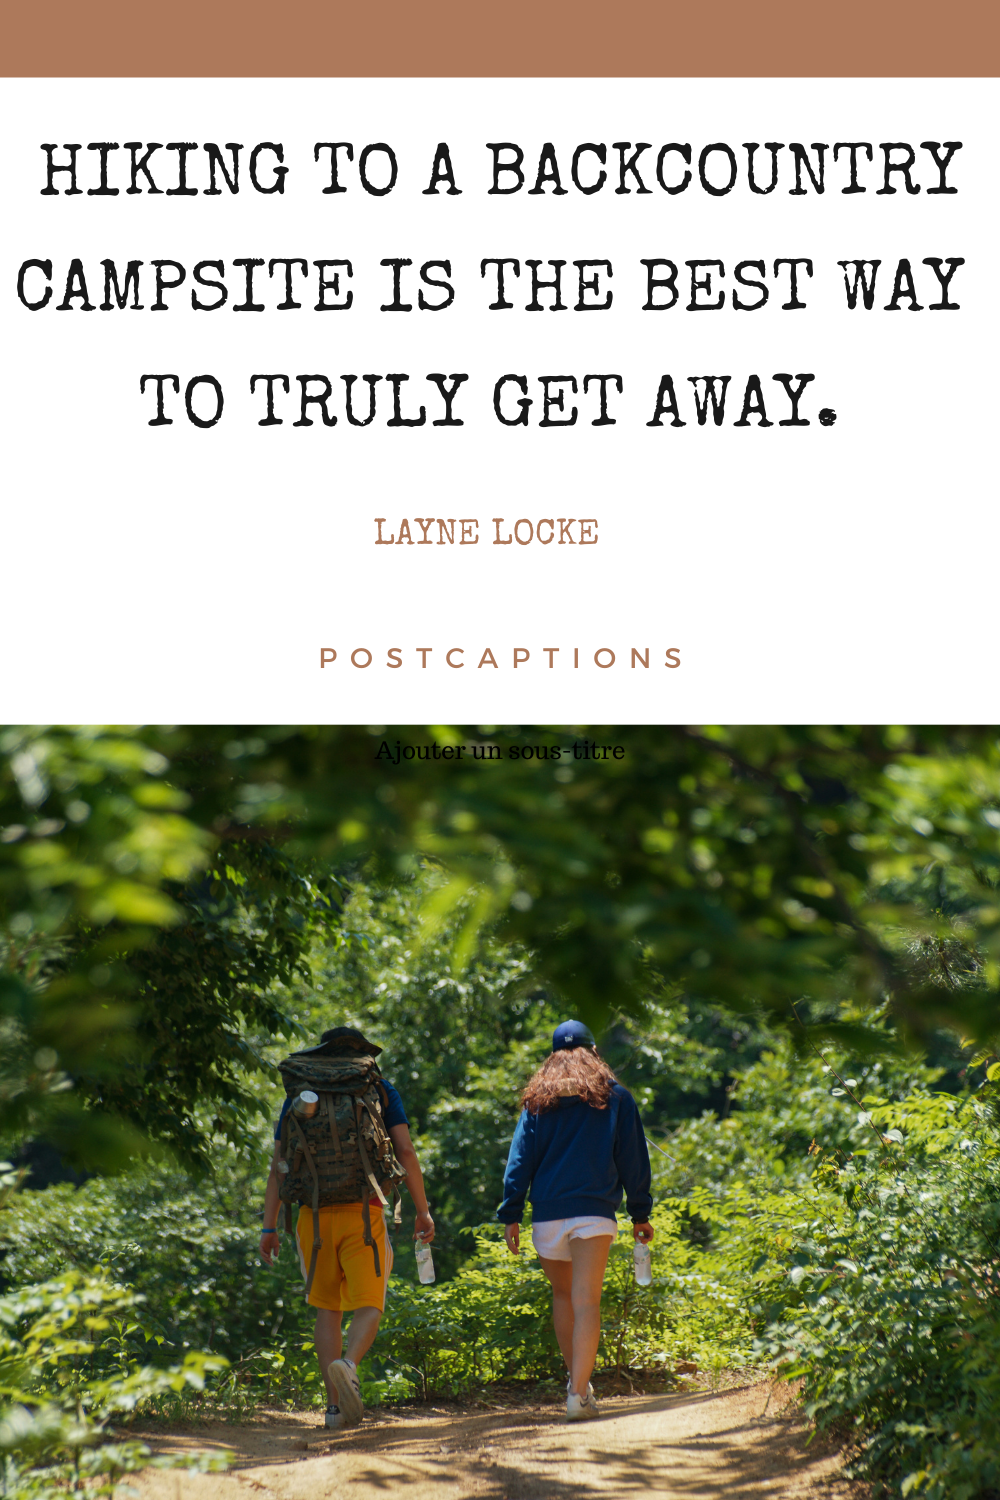 Camping quotes for Instagram